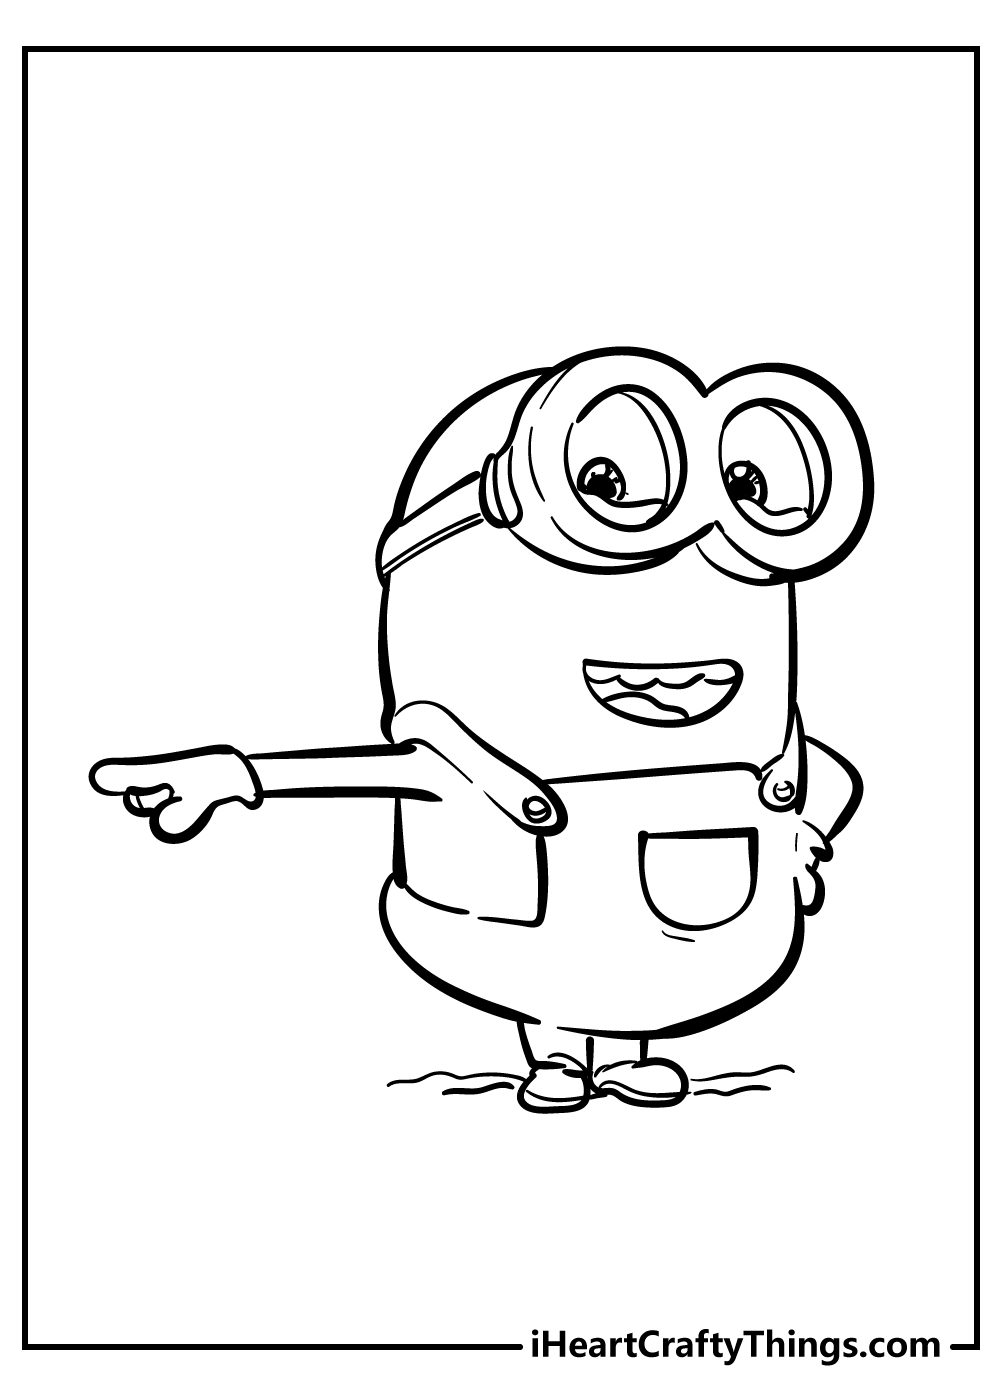 Minions Coloring Pages free pdf download